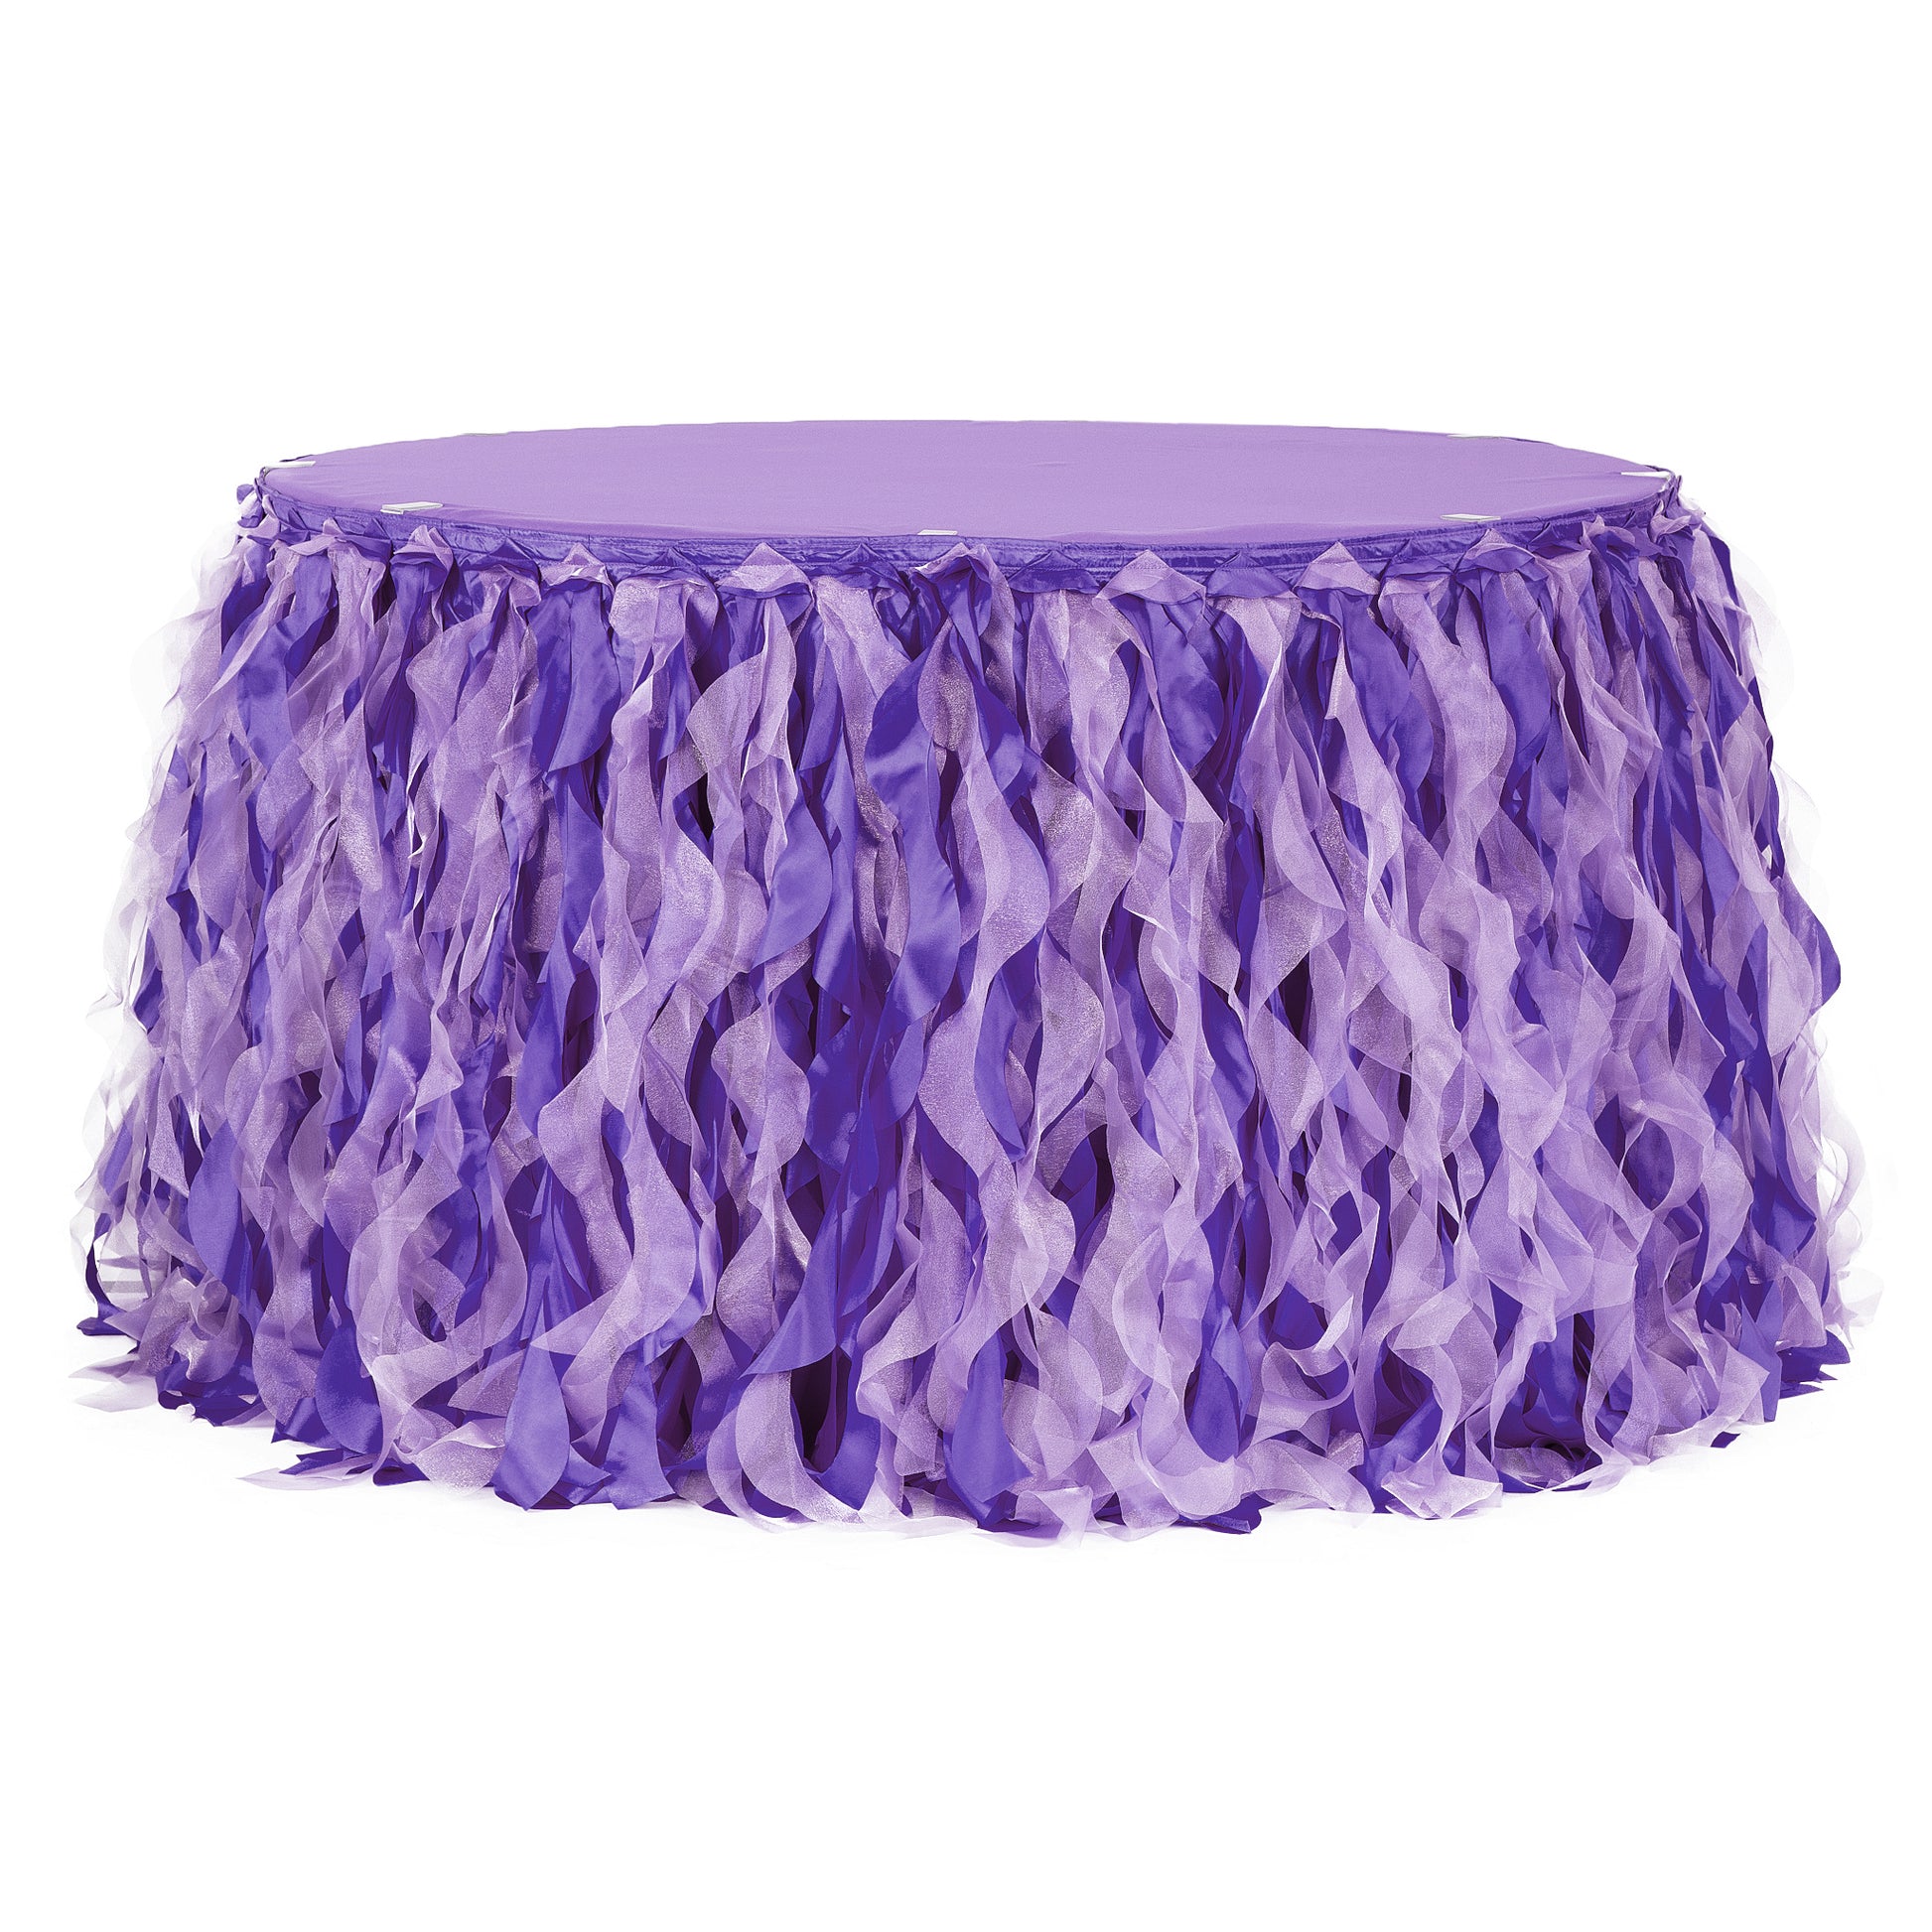 Curly Willow 21ft Table Skirt - Purple - CV Linens